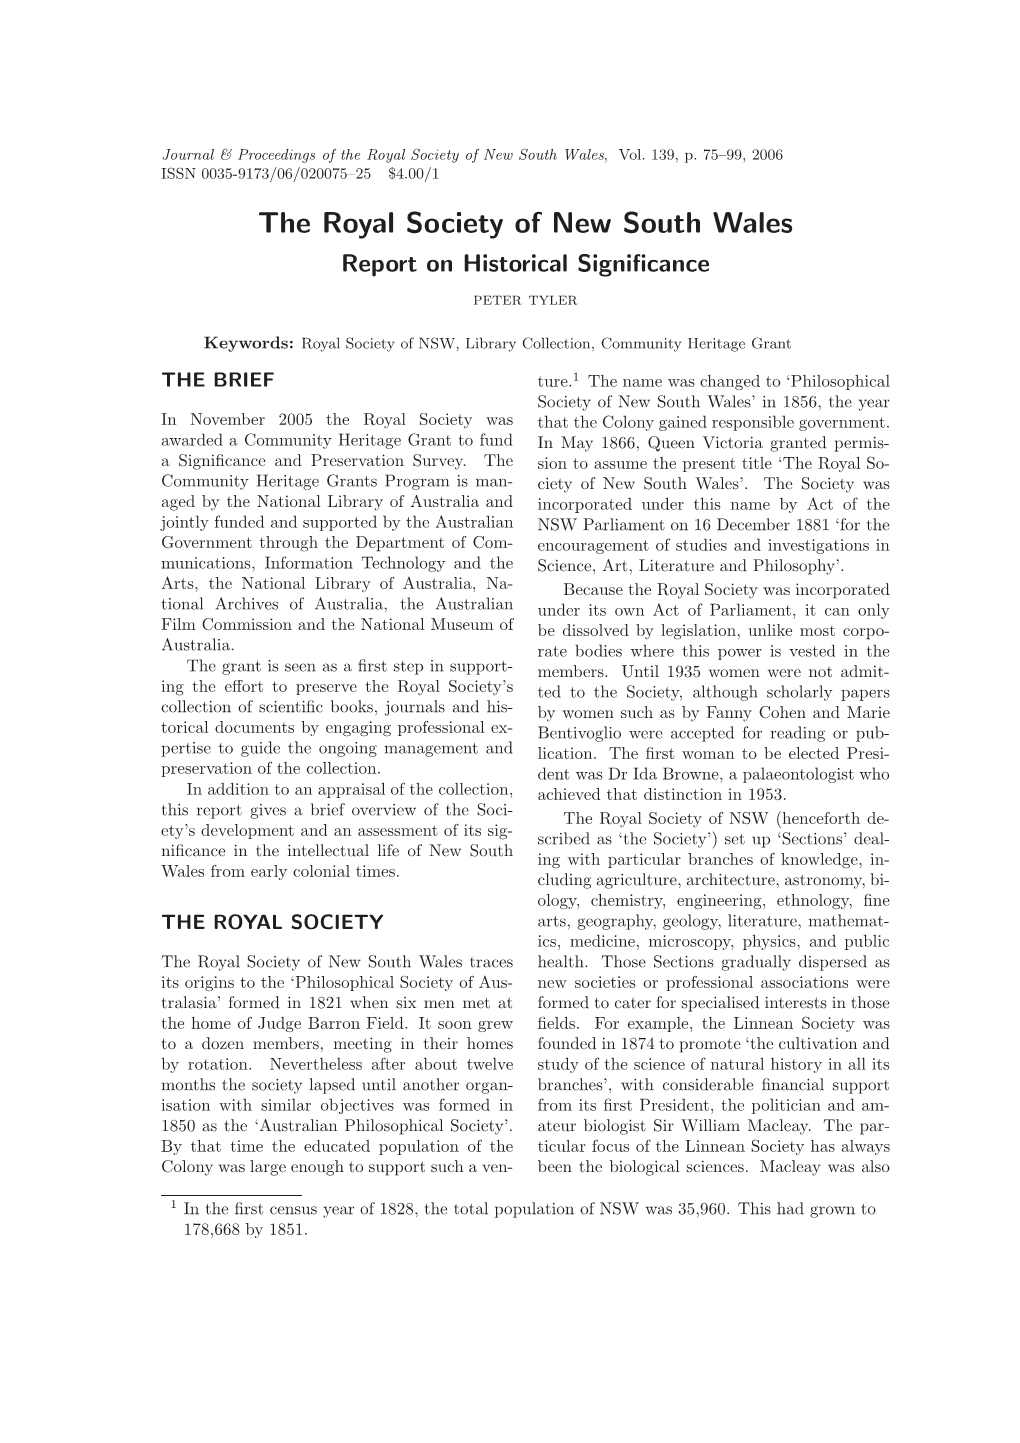 The Royal Society of New South Wales. Report on Historical Significance